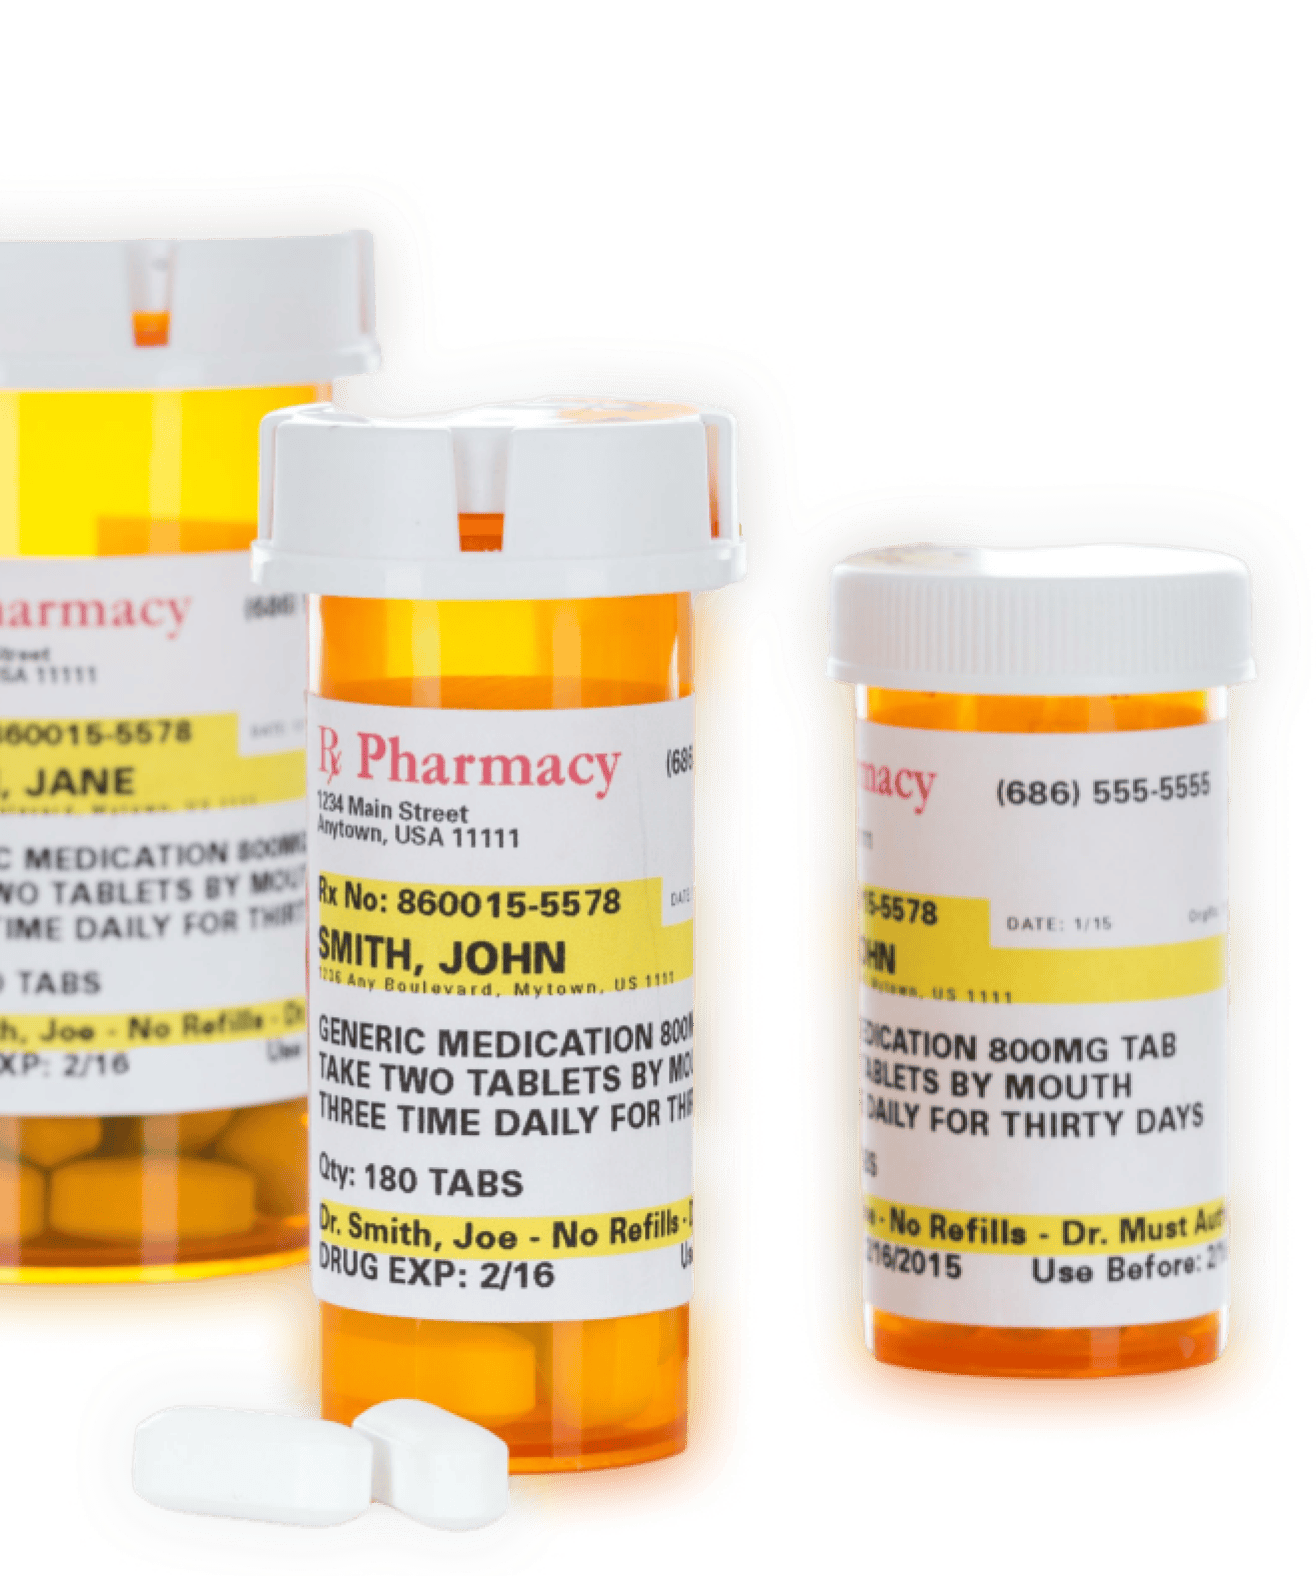 Three prescription pill bottles labeled with names, phone number, and dosage instructions. The front bottle is addressed to "Smith, John" for 800mg generic medication. Two bottles in the background have different names.